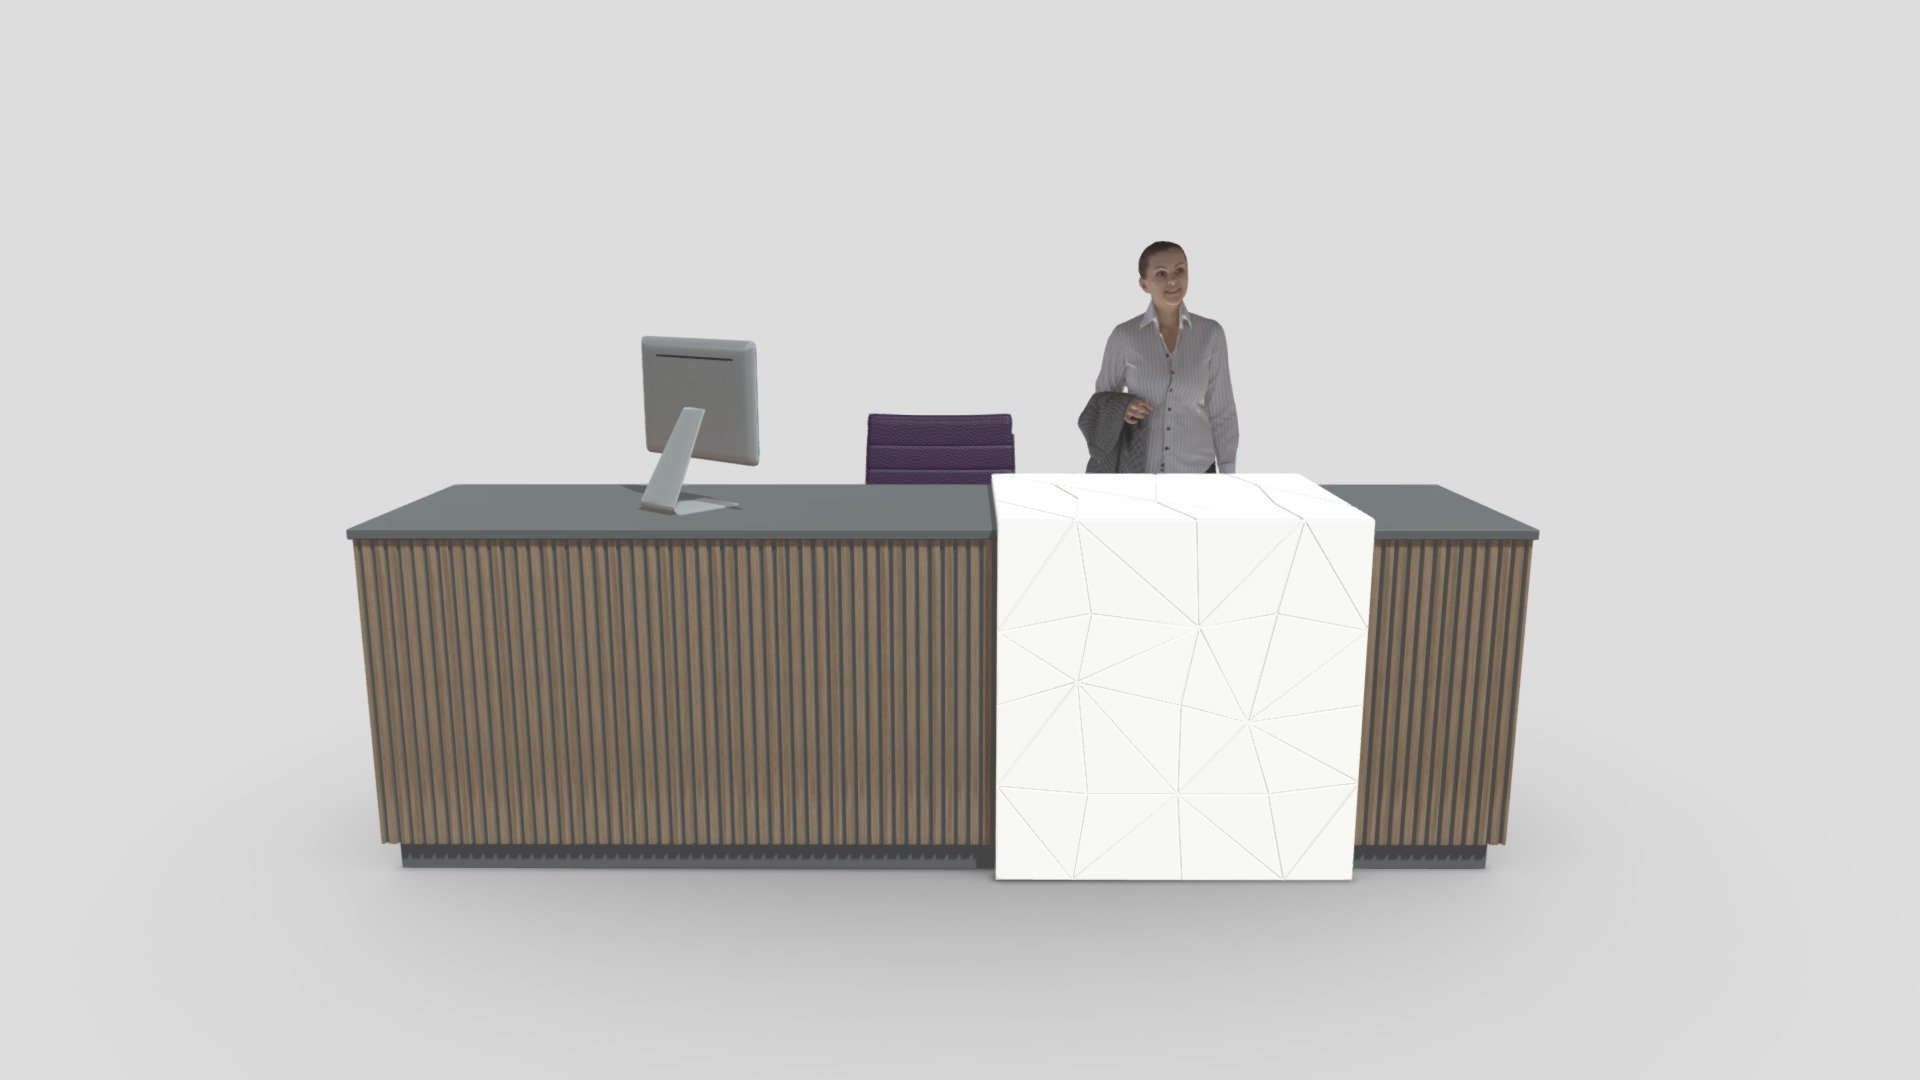 Reception Desk - 086

Native Format File : 3Ds Max 2020 &ndash; Rendering by Vray Next

File save as : 3Ds Max 2017 with converted all object to Editable Poly.

Exporting Formats :
Autodesk FBX ( .fbx ) and OBJ ( .obj &amp; .mtl ).

All 4 Texture maps are include as JPG.

Support 24/7 3d model